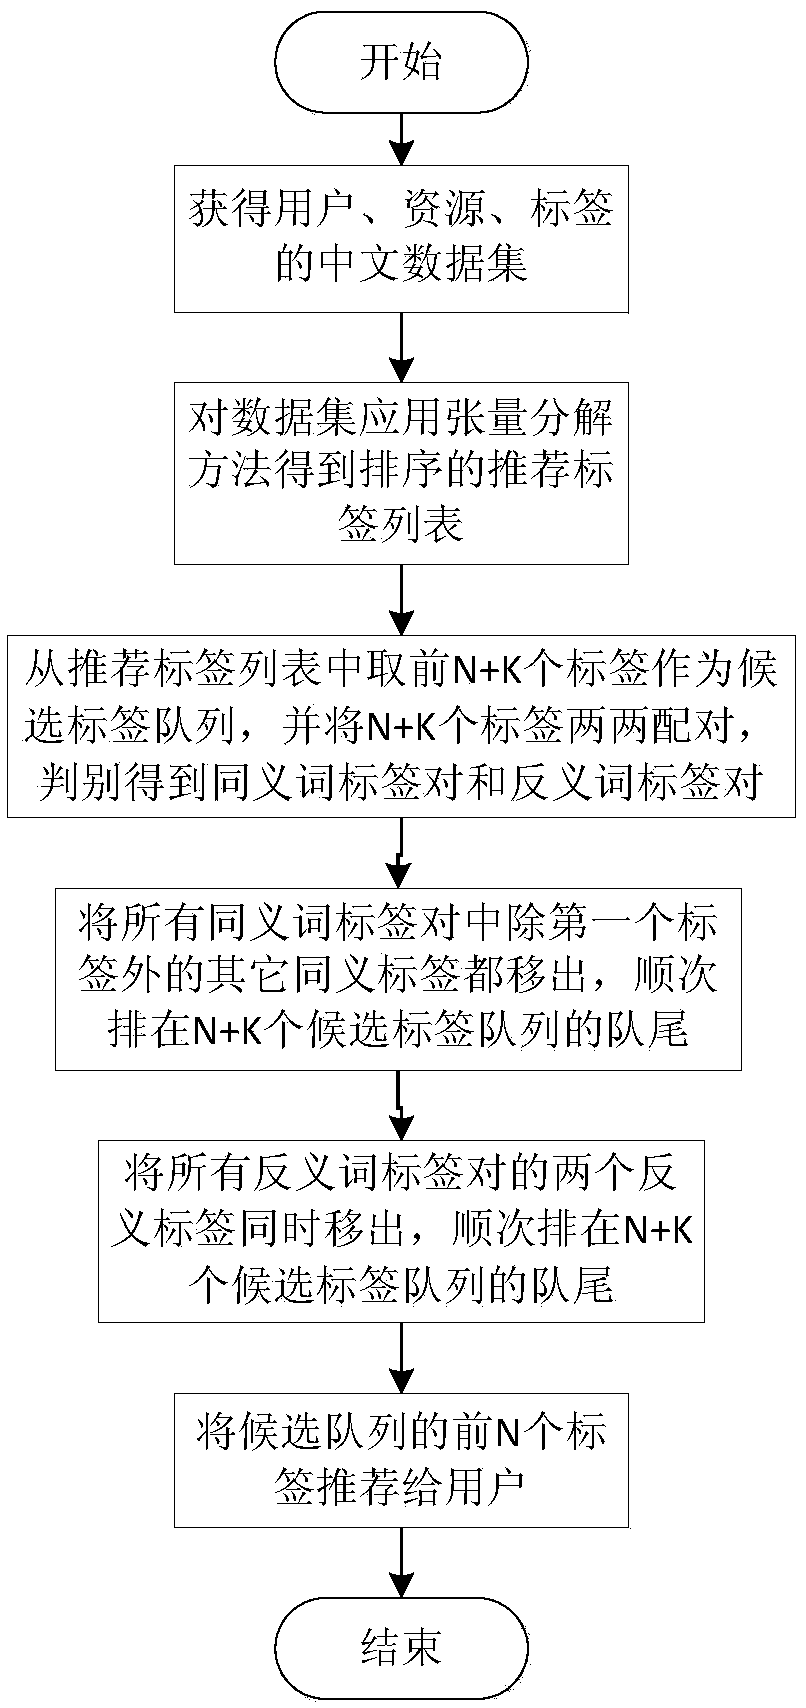 Chinese tag recommendation correction method based on synonym and antonym